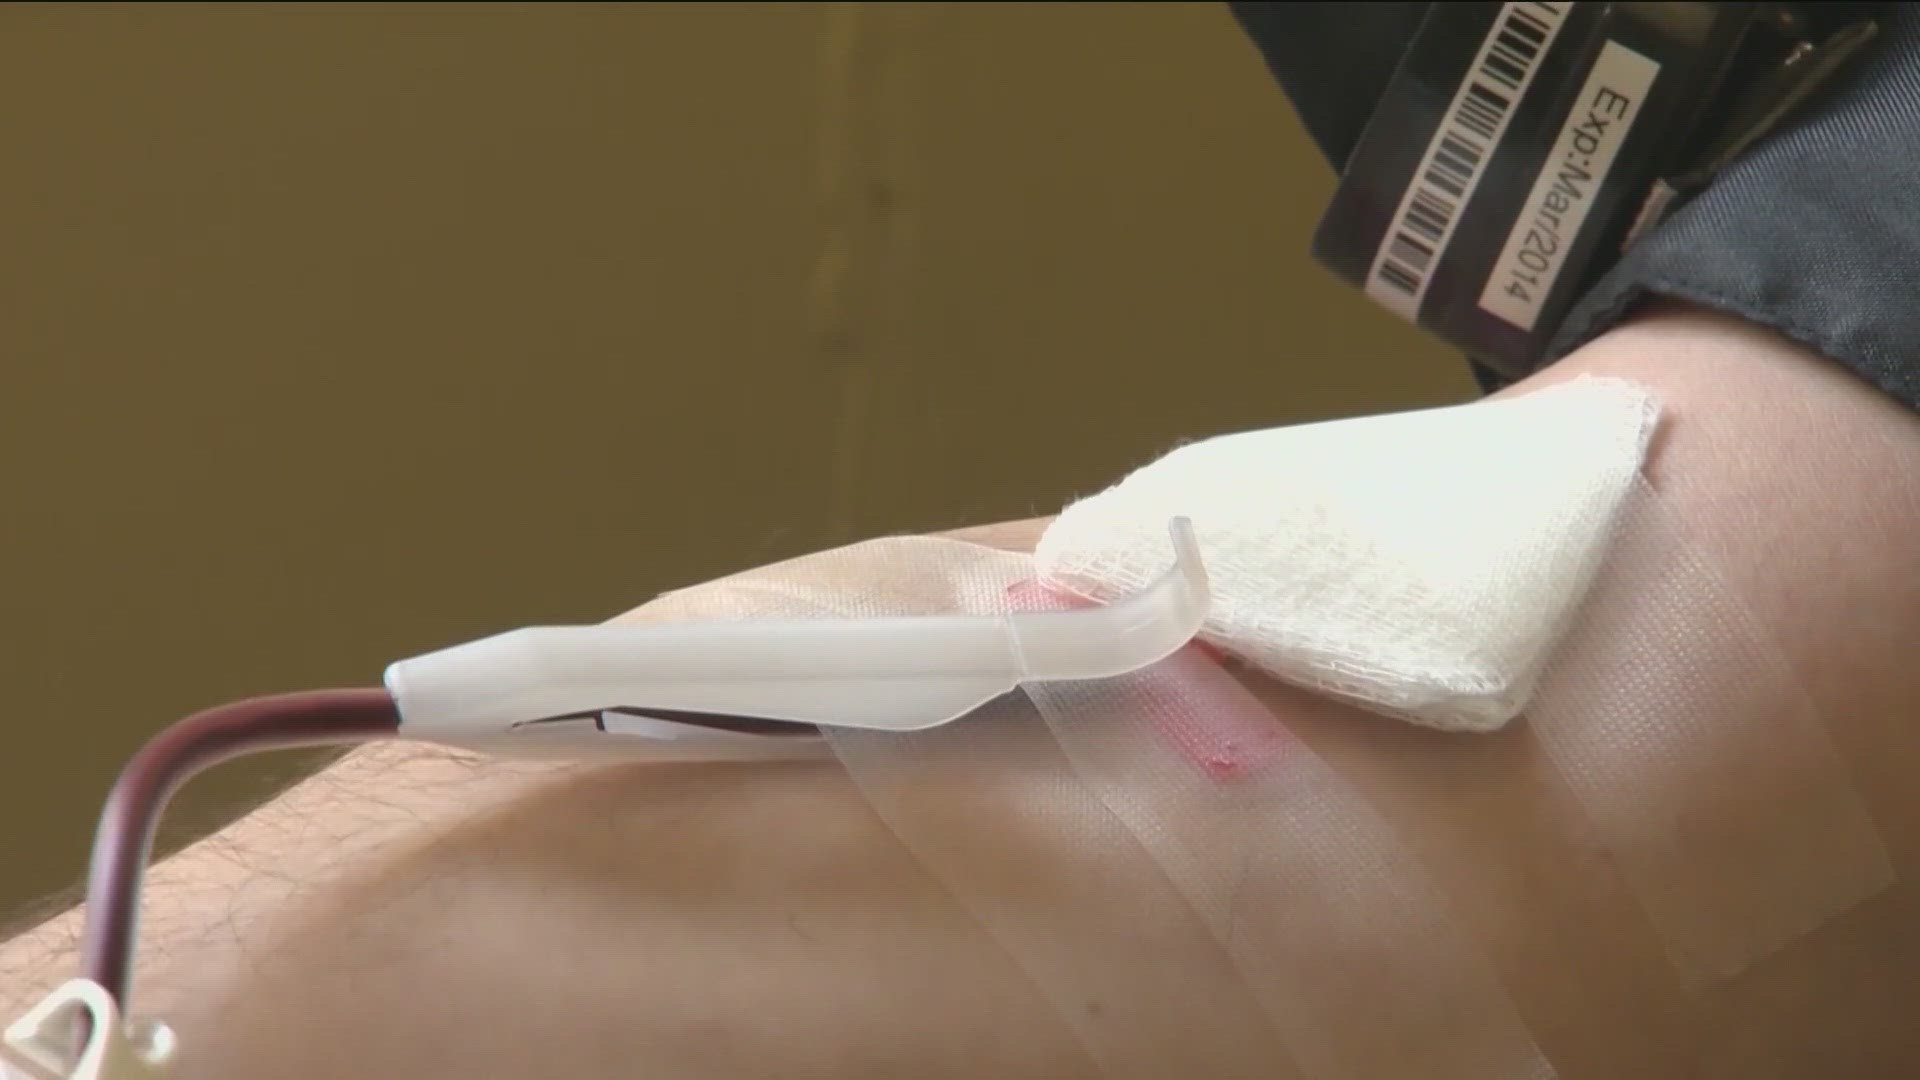 The Austin Police Department has launched a blood draw program as part of its DWI procedures. Some officers will be trained in drawing blood to test for alcohol.